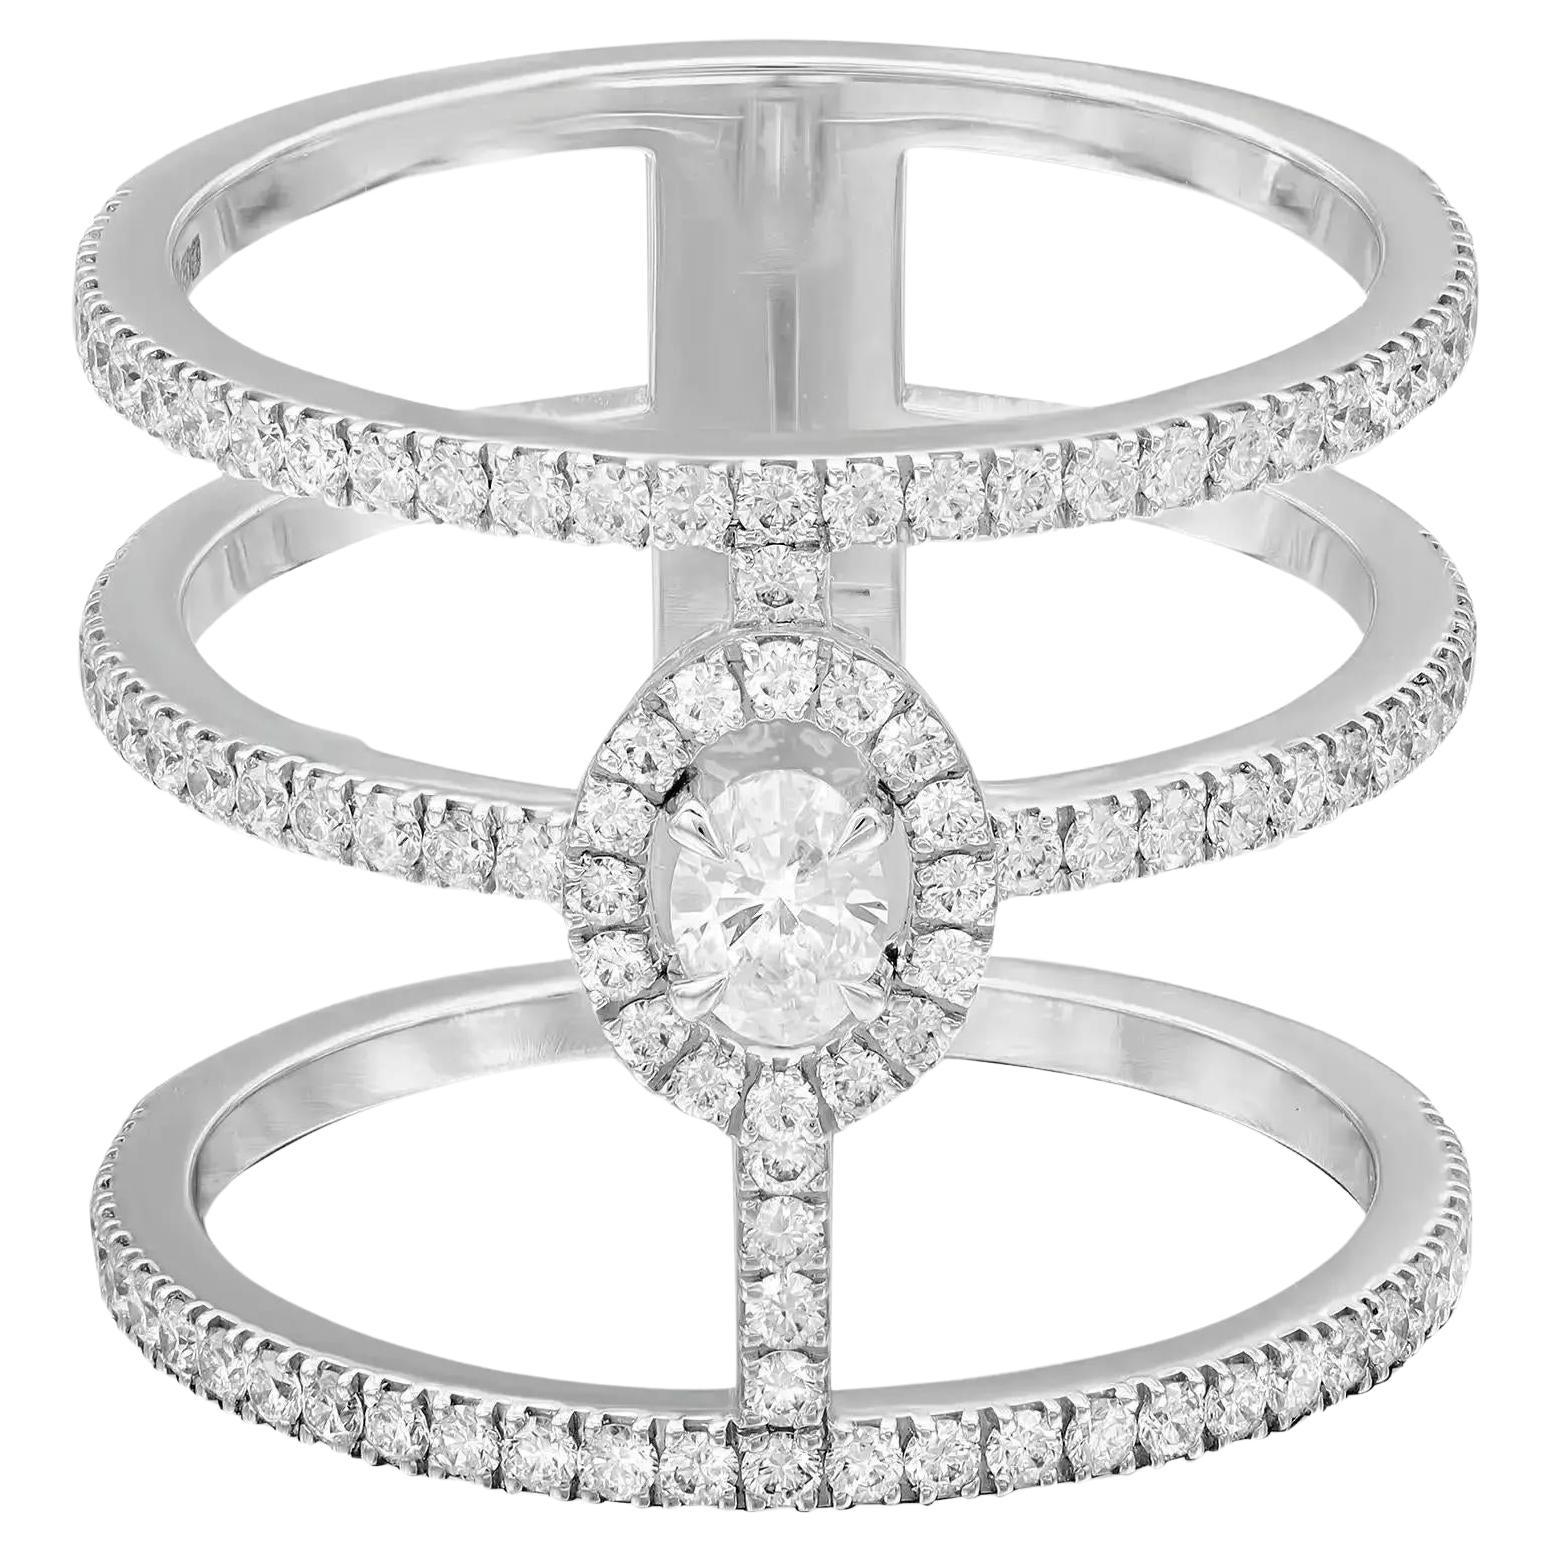 Messika 0.73Ctw Glam'Azone 3 Row Diamond Band Ring 18K White Gold Size 53 US 6.5 For Sale